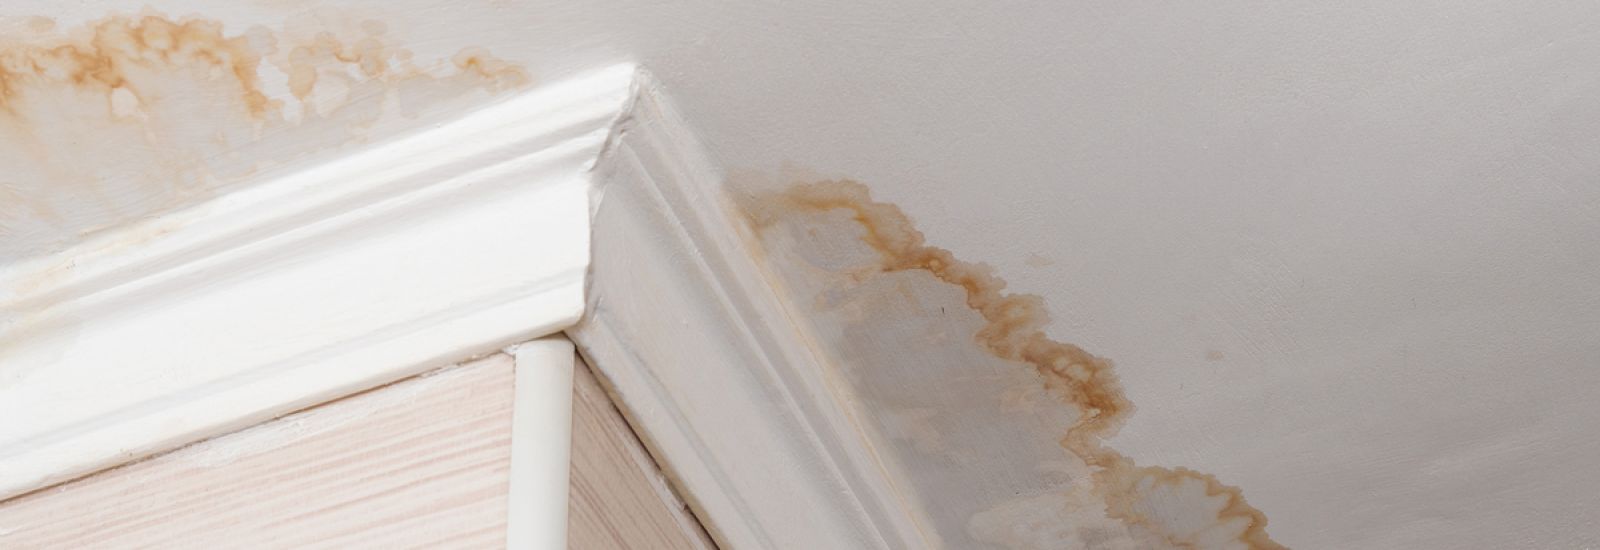 Leaky Roof? Now What?